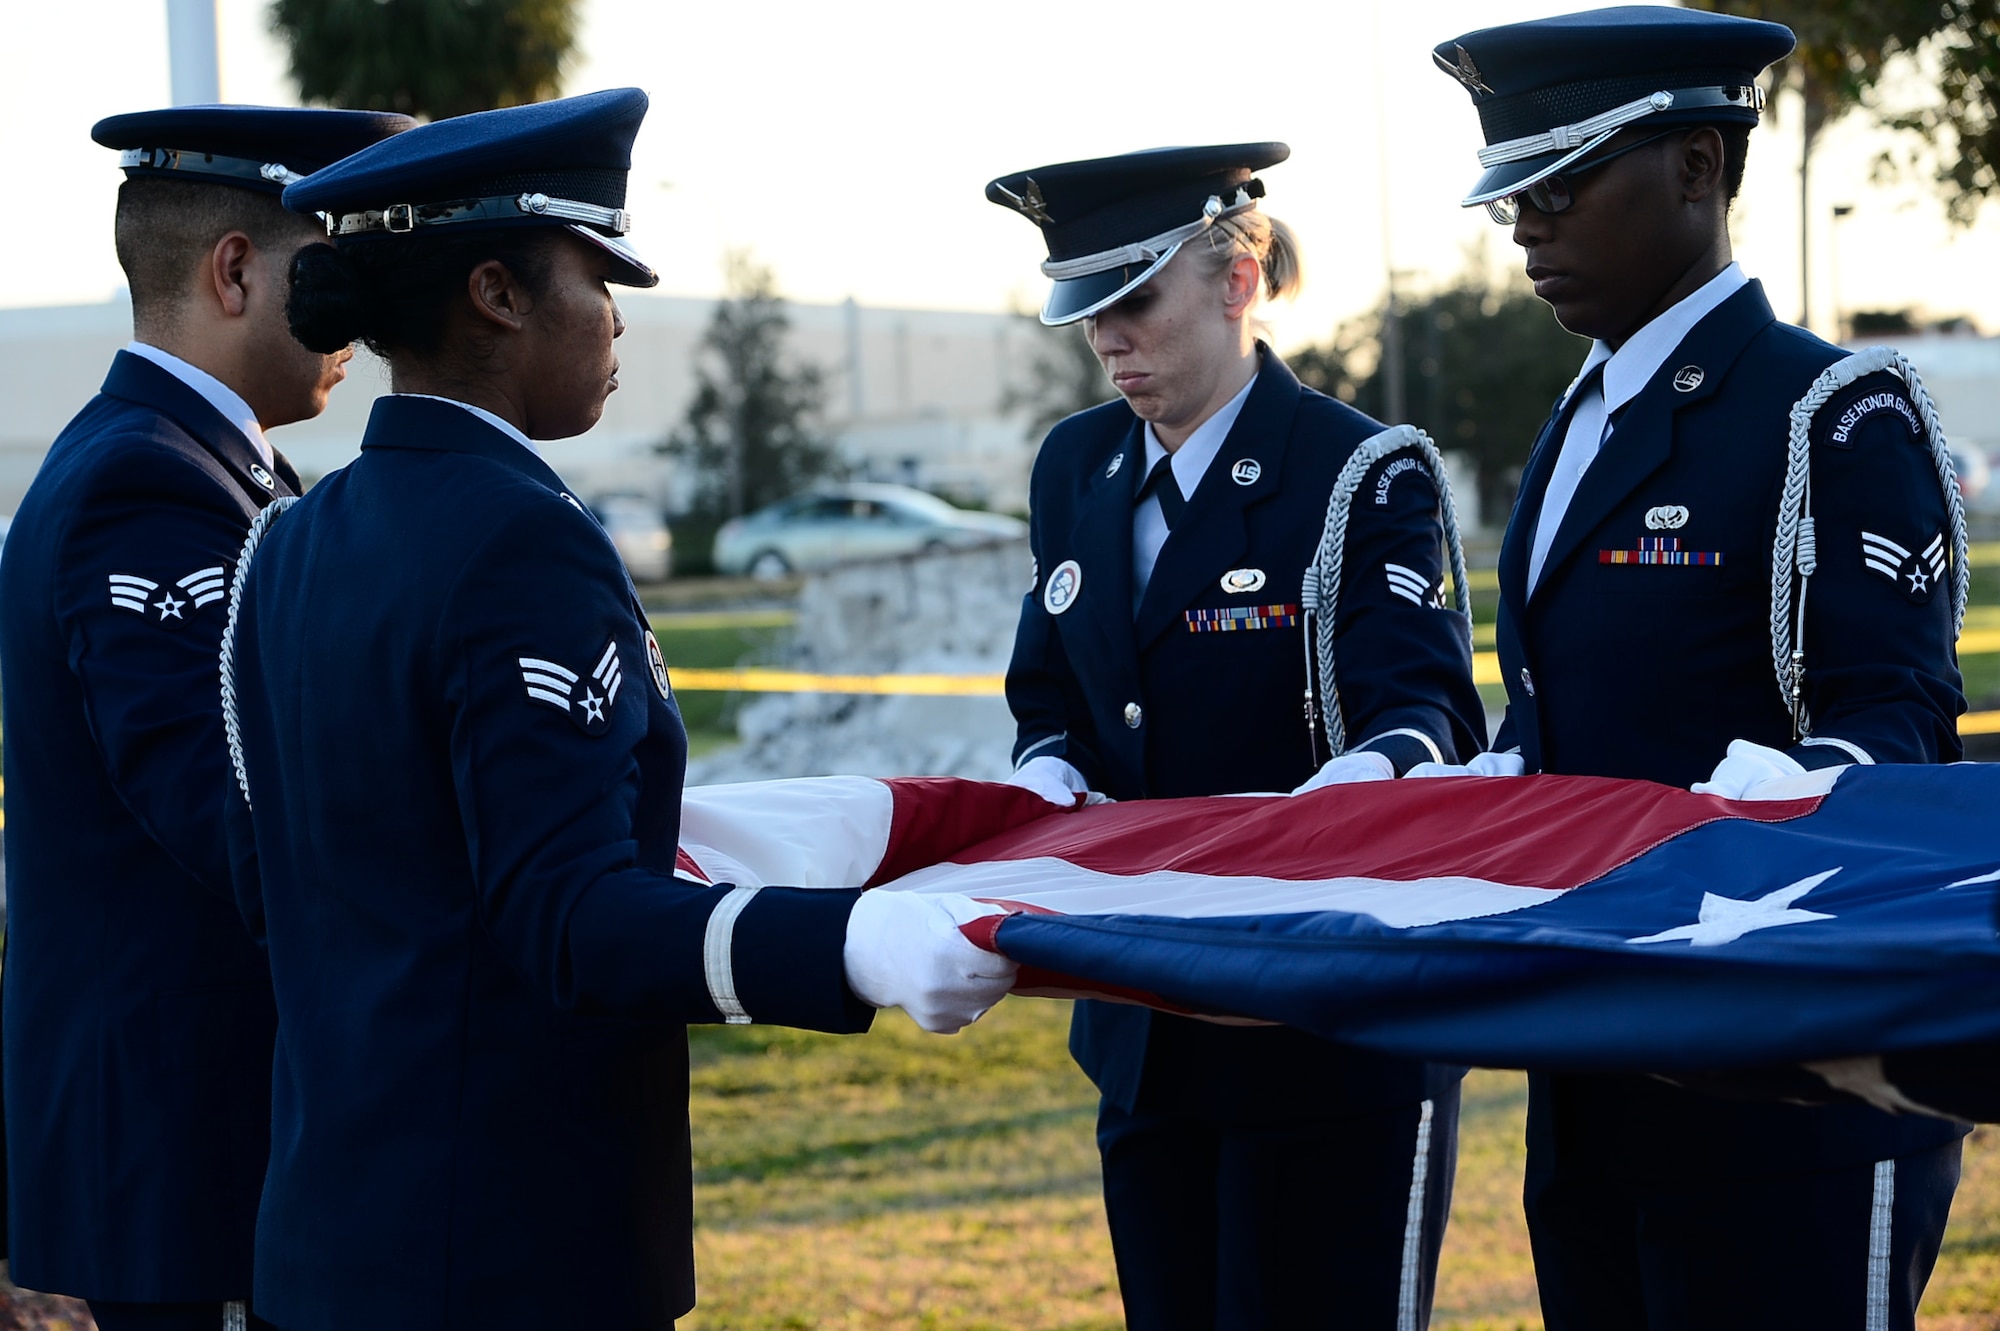 Honor guardsmen with the MacDill Air Force Base honor guard fold a flag during a Veterans Day Ceremony at MacDill Air Force Base, Fla., Nov. 10, 2016. MacDill honored Veterans Day with a ceremony consisting of opening remarks by Col. Patrick Miller, commander of the 6th Mission Support Group, a flag fold and retreat ceremony. (U.S. Air Force photo by Senior Airman Tori Schultz)